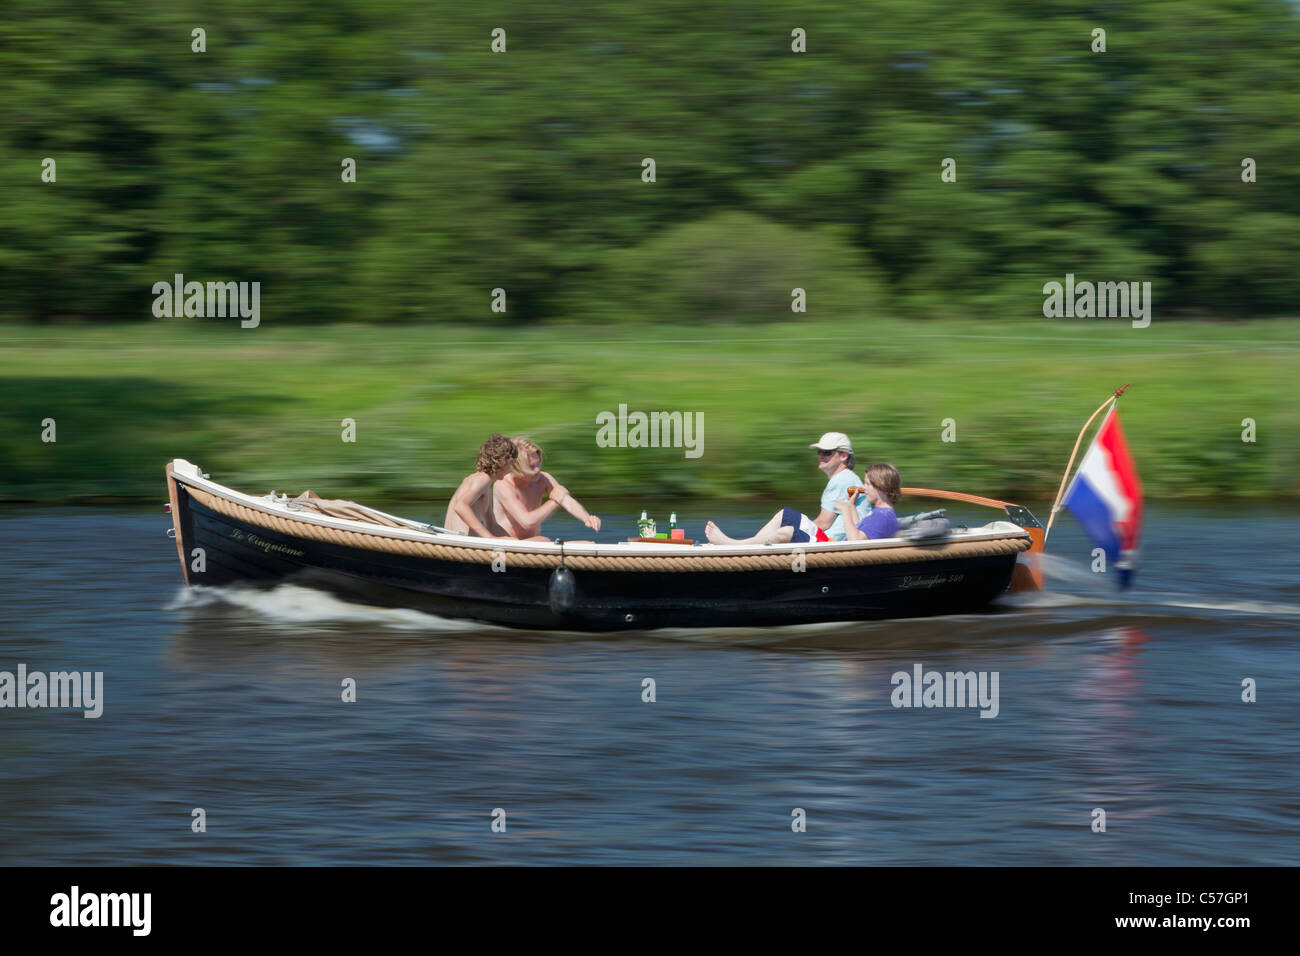 The Netherlands, Vreeland, People in pleasure boat on river called Vecht Stock Photo